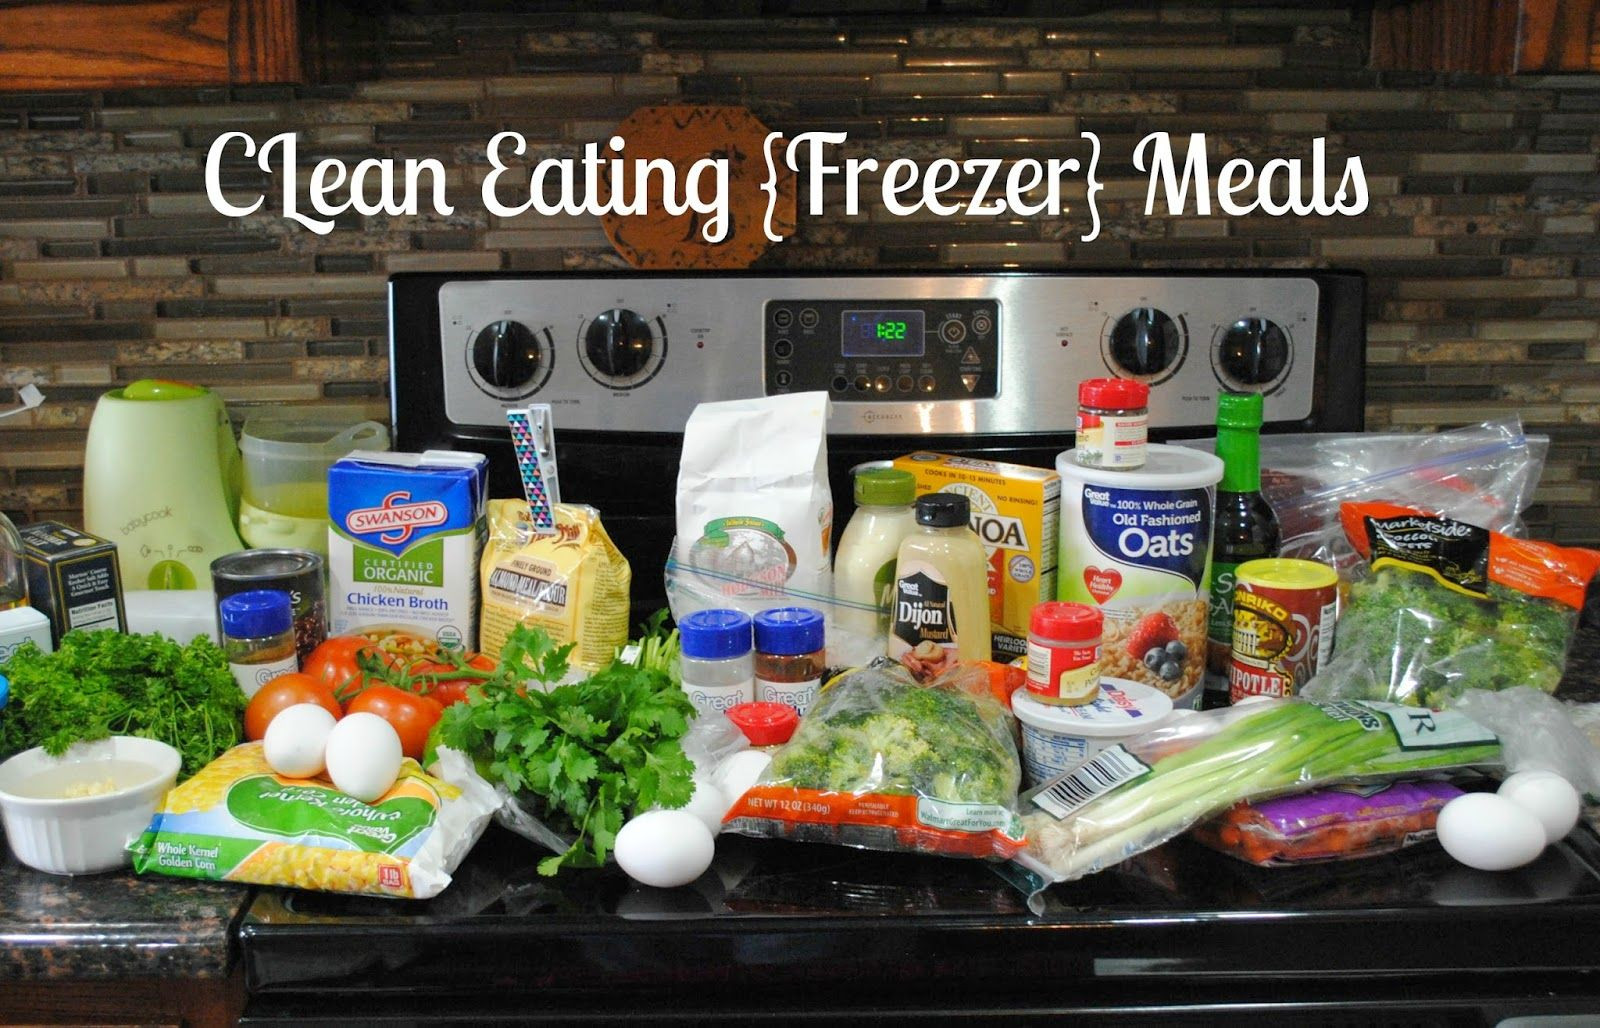 Clean Eating Freezer Meals
 Clean Eating Freezer Meals Six Cents